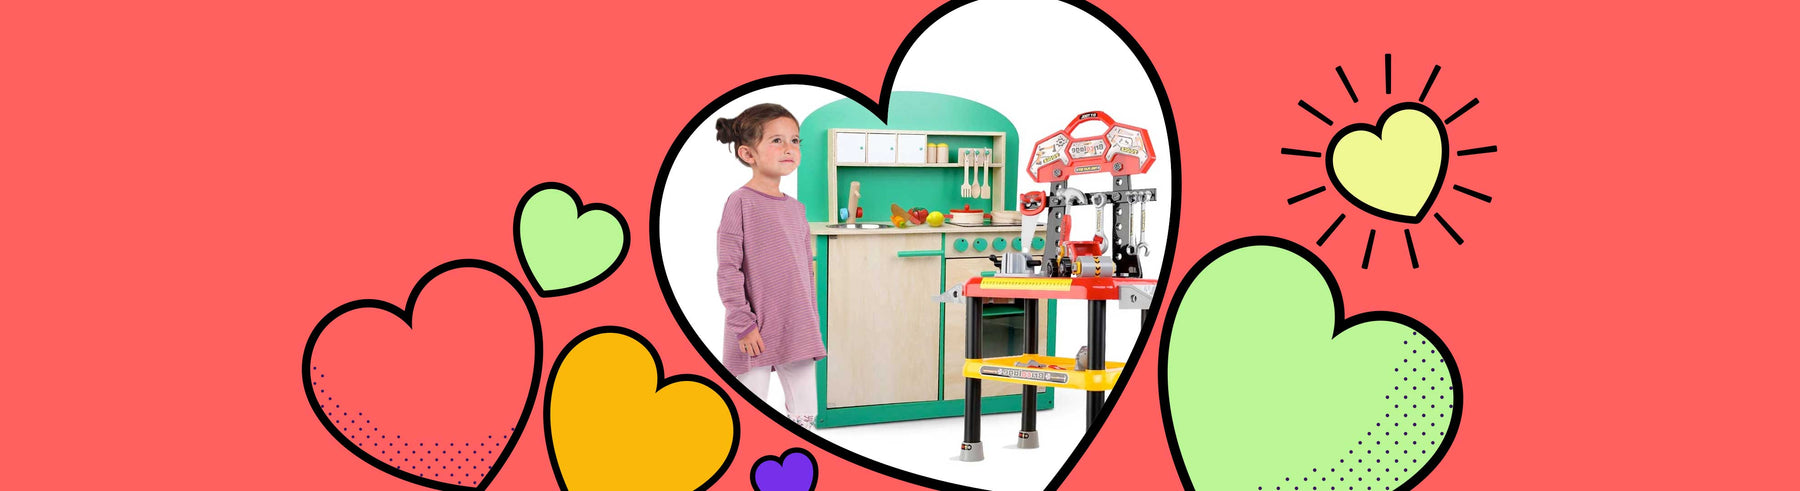 Kids Play Sets for all budgets